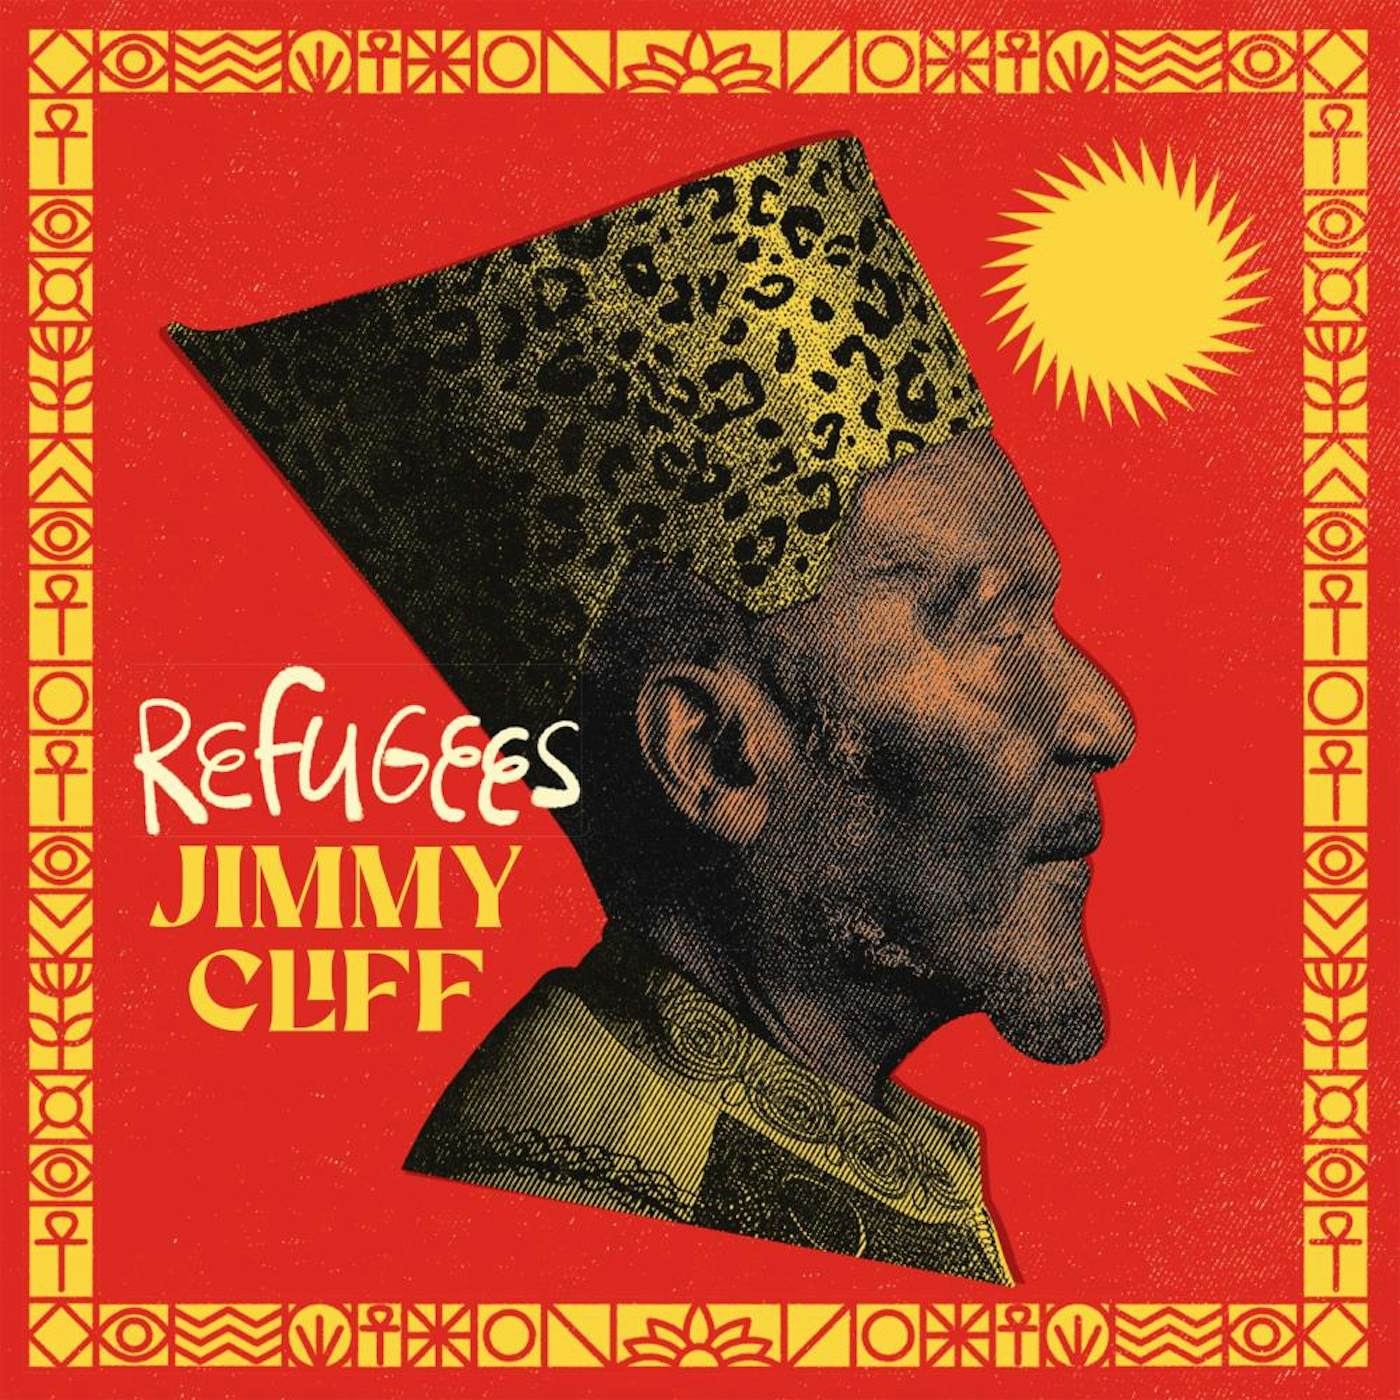 Jimmy Cliff REFUGEES CD